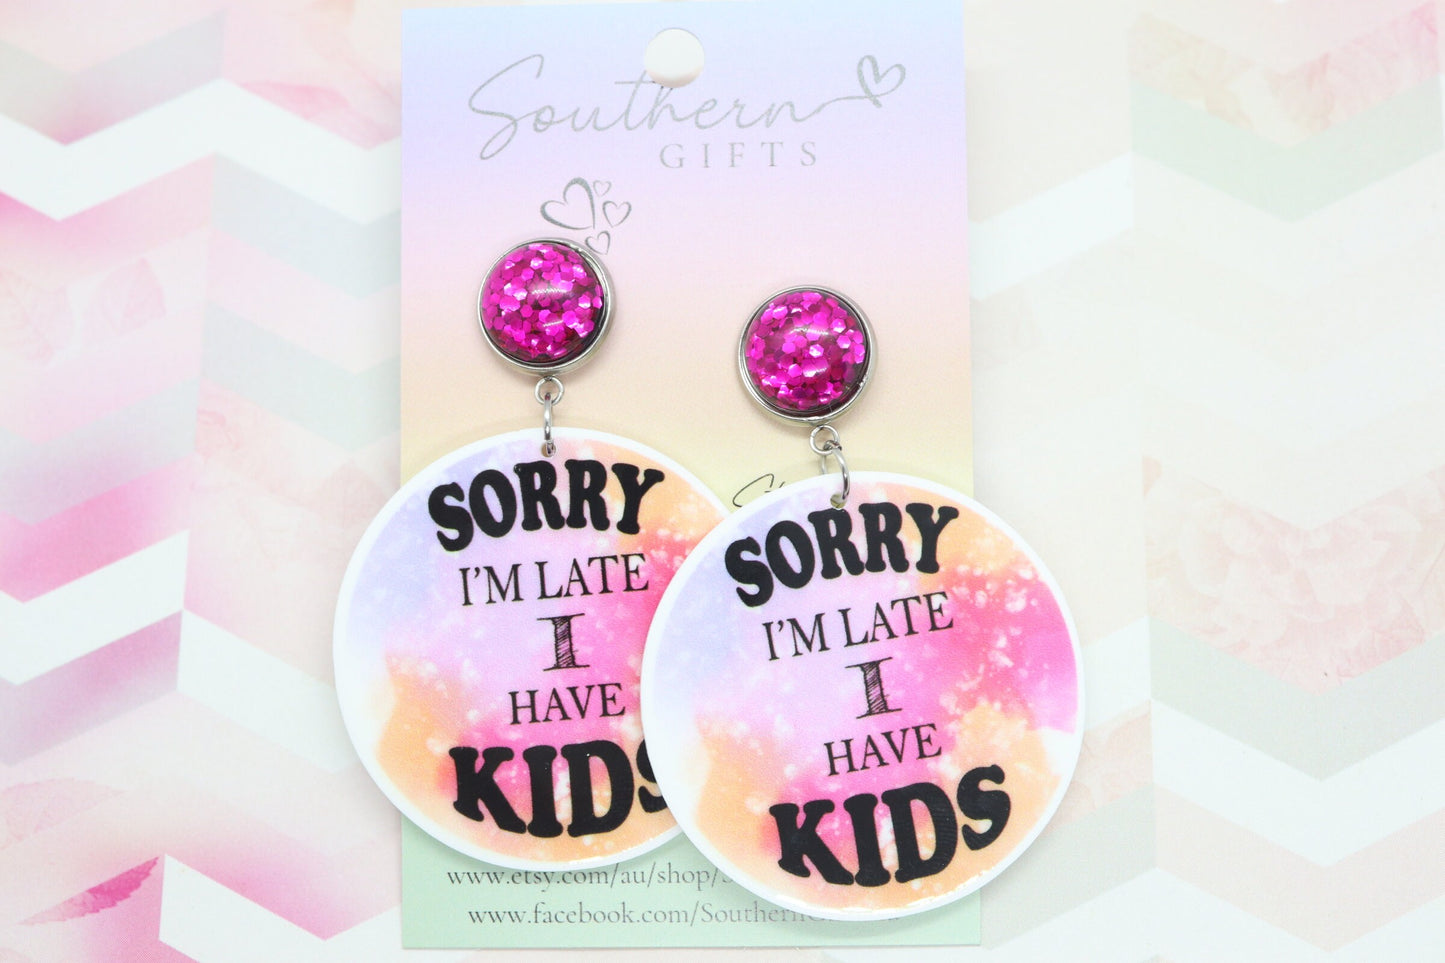 Standard Sorry I'm Late I Have Kids Statement Earrings